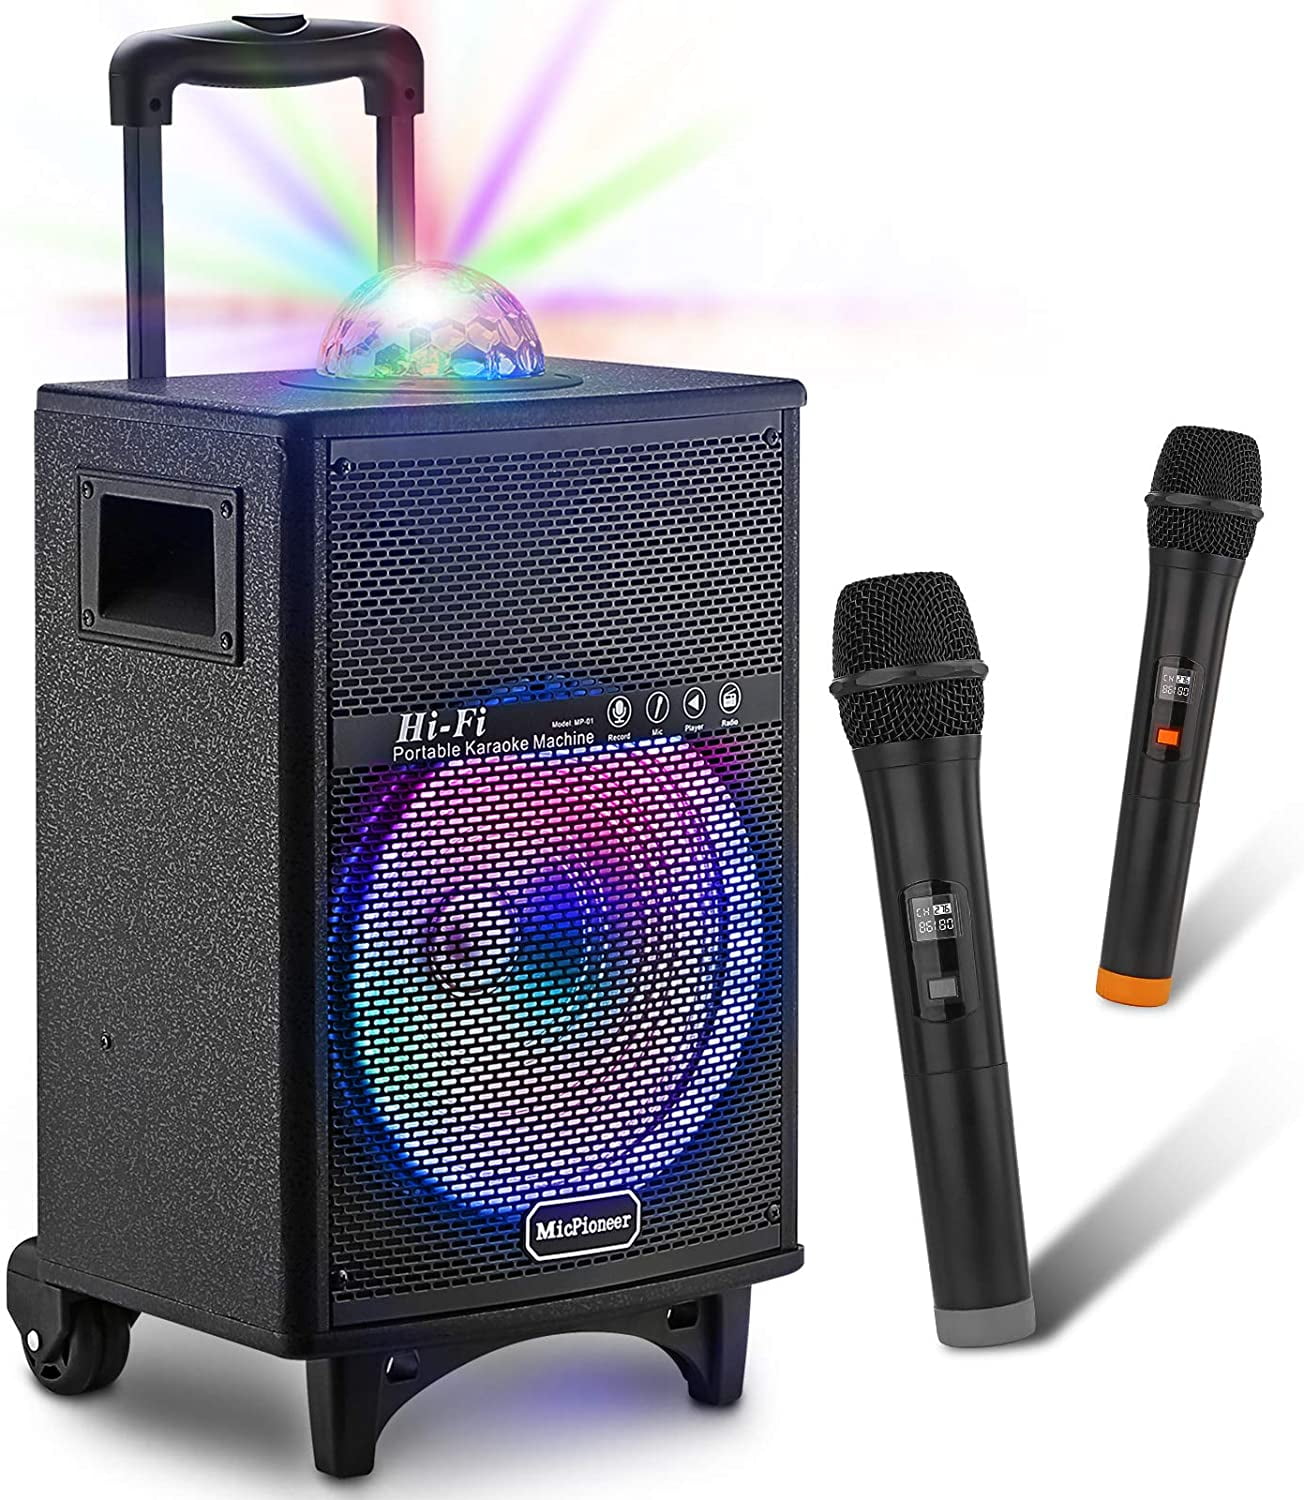 Powered PA System for Party Wedding Portable Karaoke Machine for kids and adult MicPioneer Bluetooth PA System with Microphones and LED Light Great gift idea for Christmas and Birthday. Church 